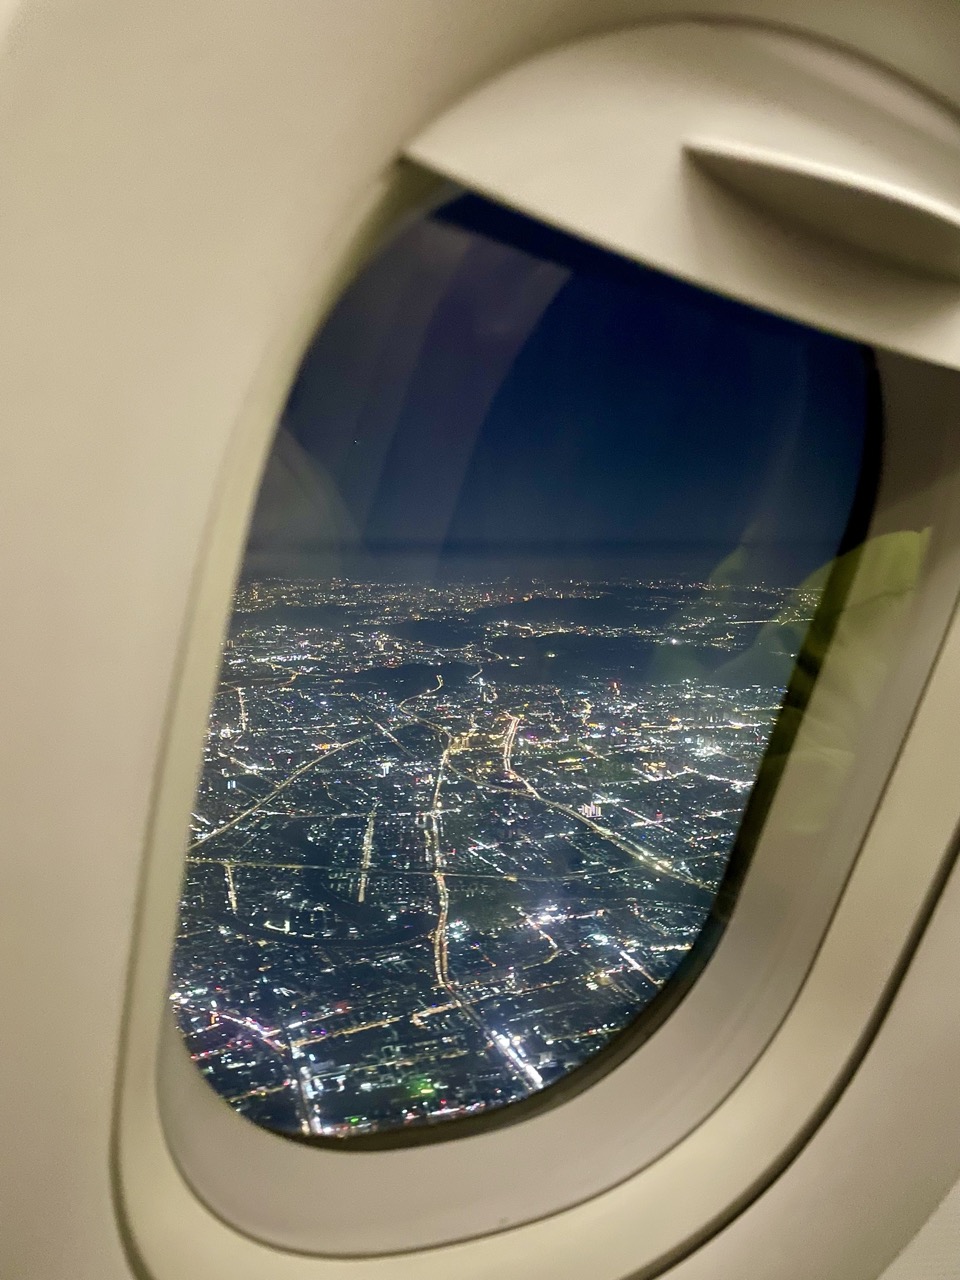 From the porthole of the plane